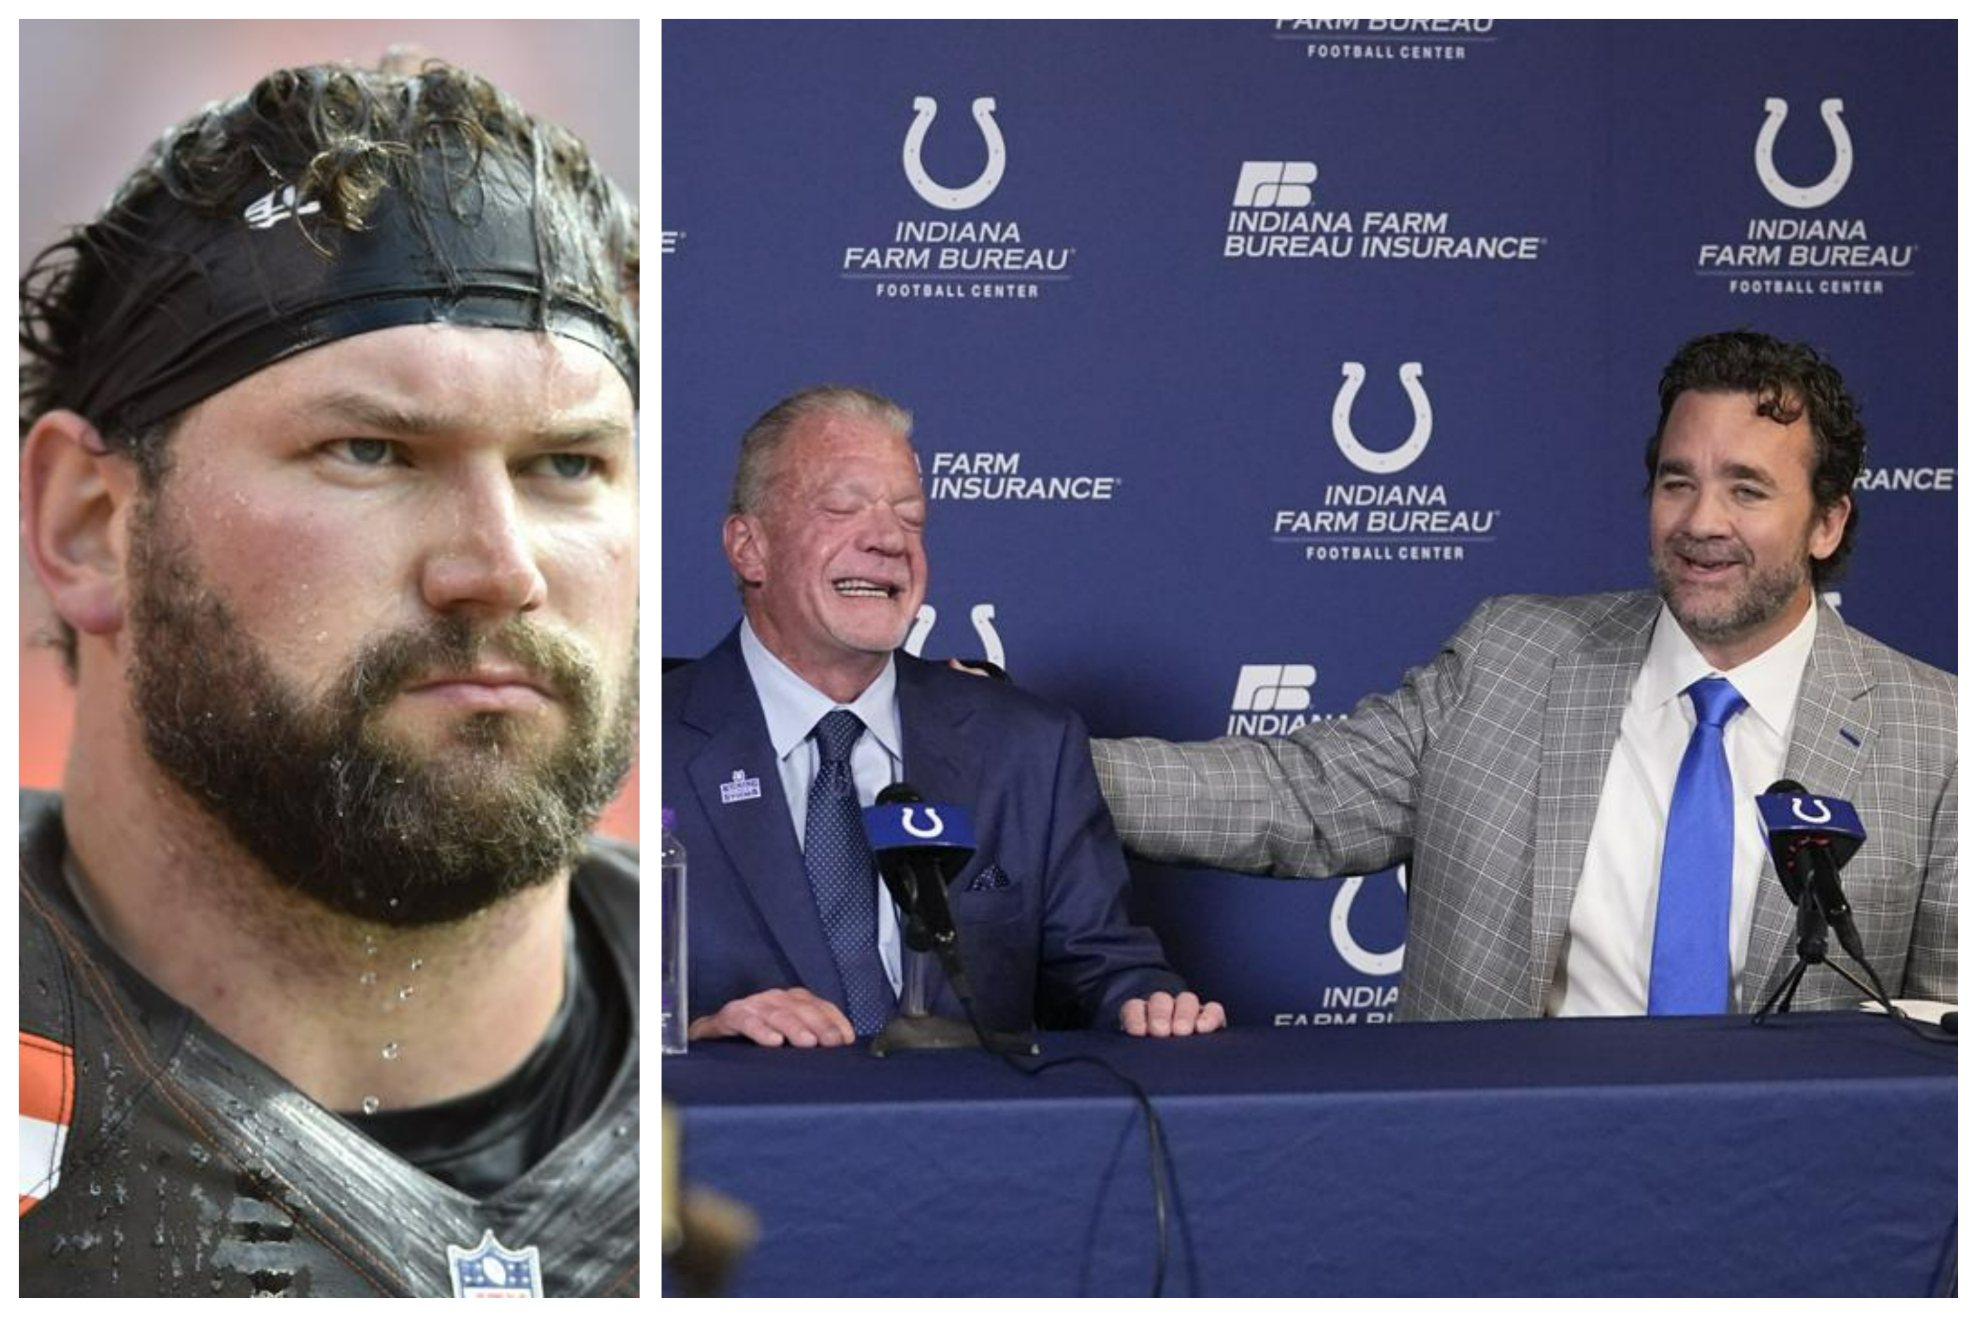 Joe Thomas chimed in on the Indianapolis Colts hiring of Jeff Saturday as head coach.